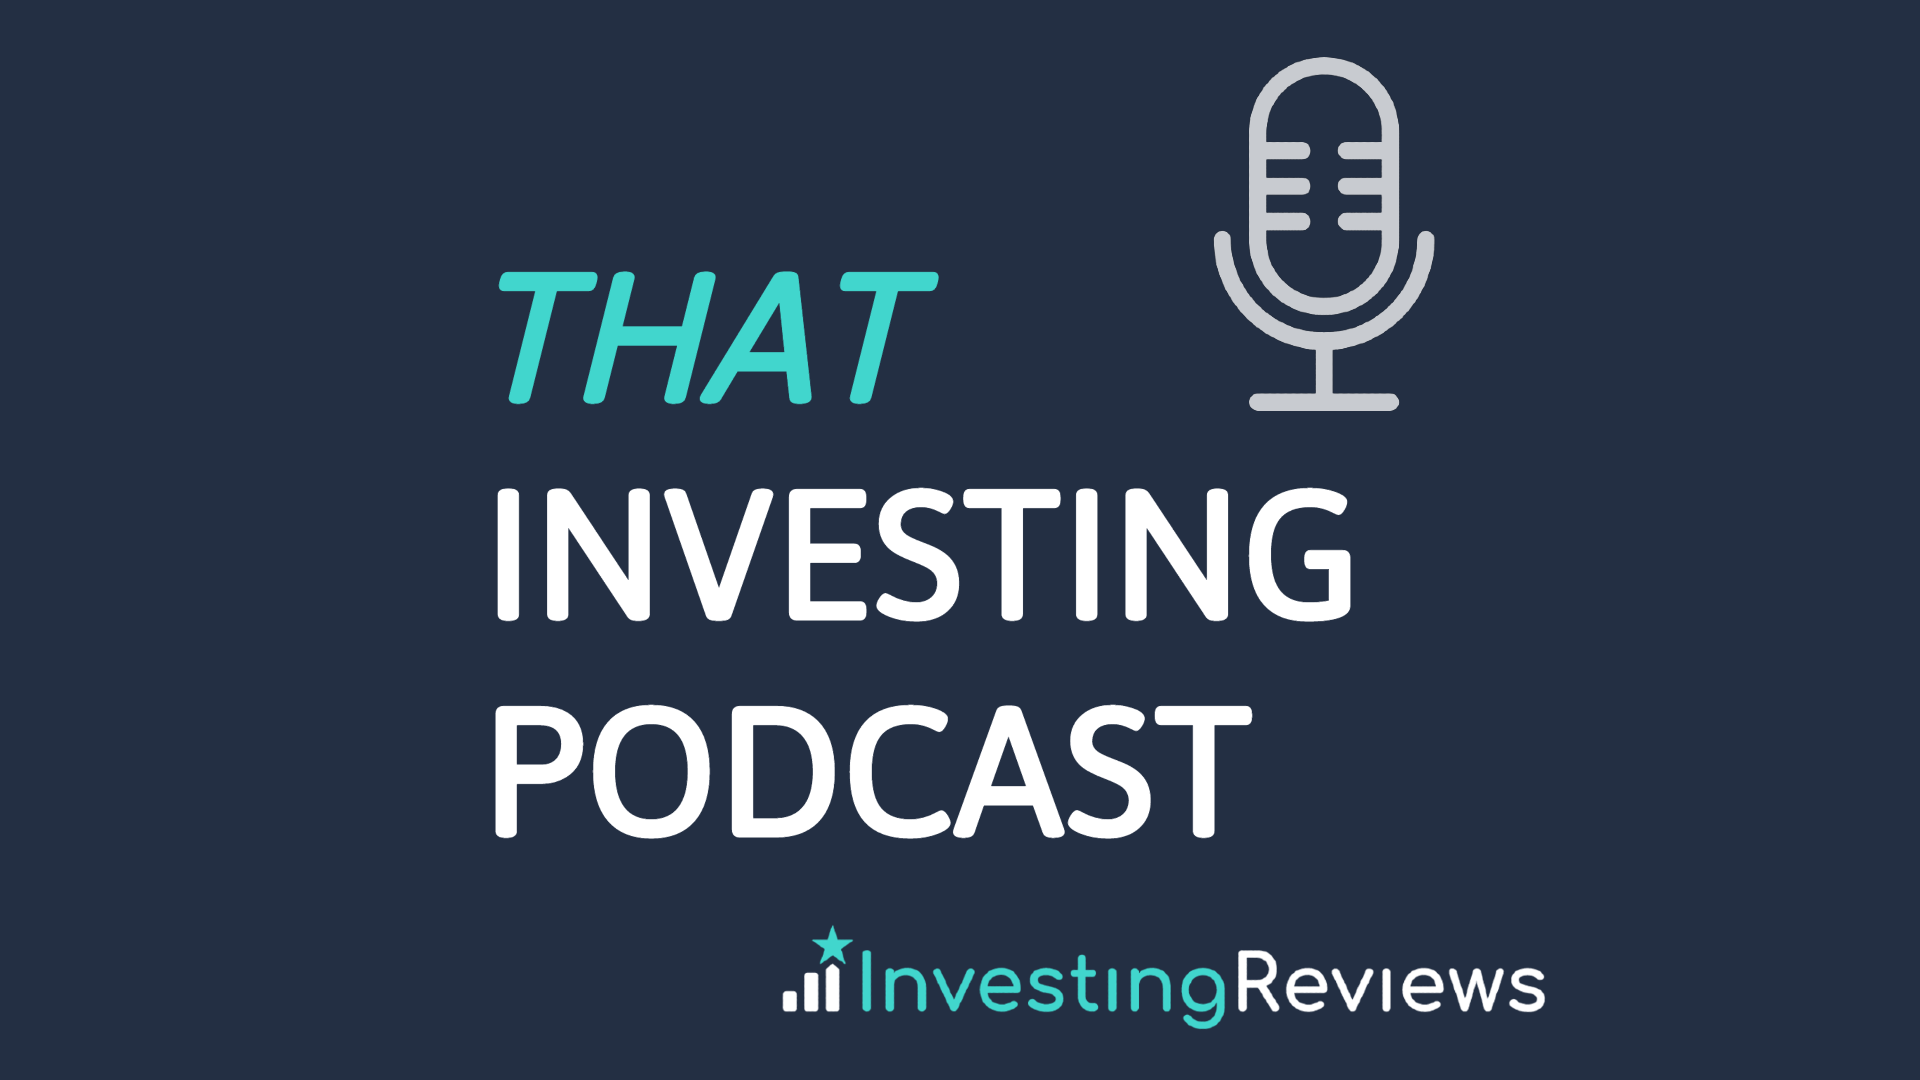 That Investing Podcast | InvestingReviews